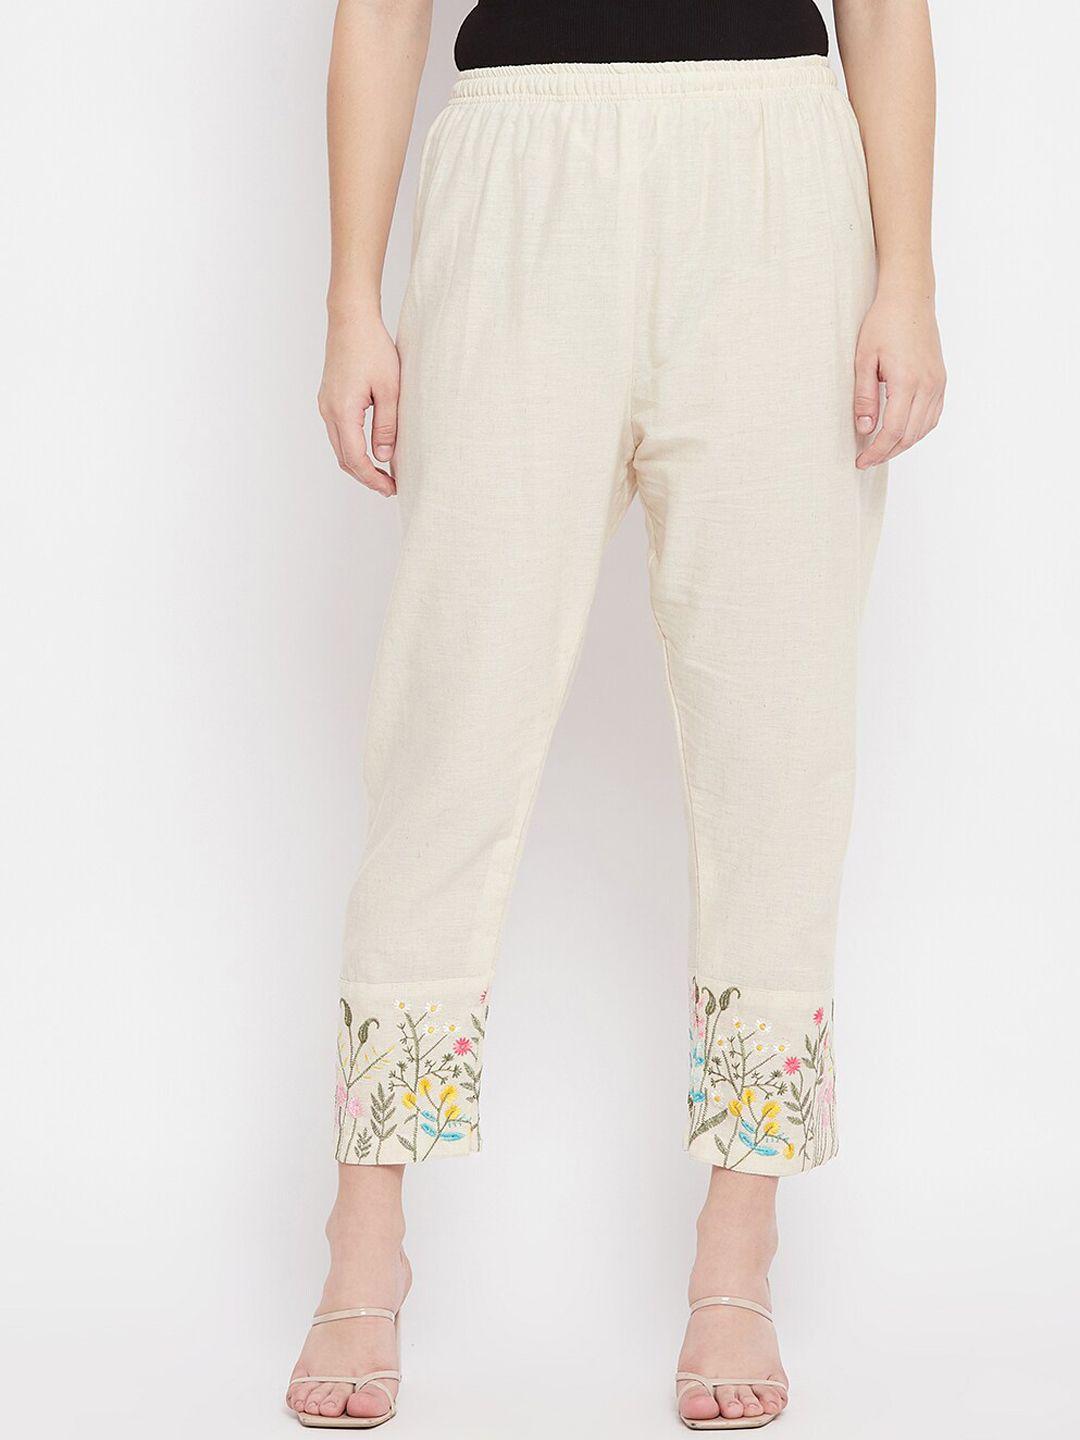 clora creation women beige floral embroidered cotton trousers